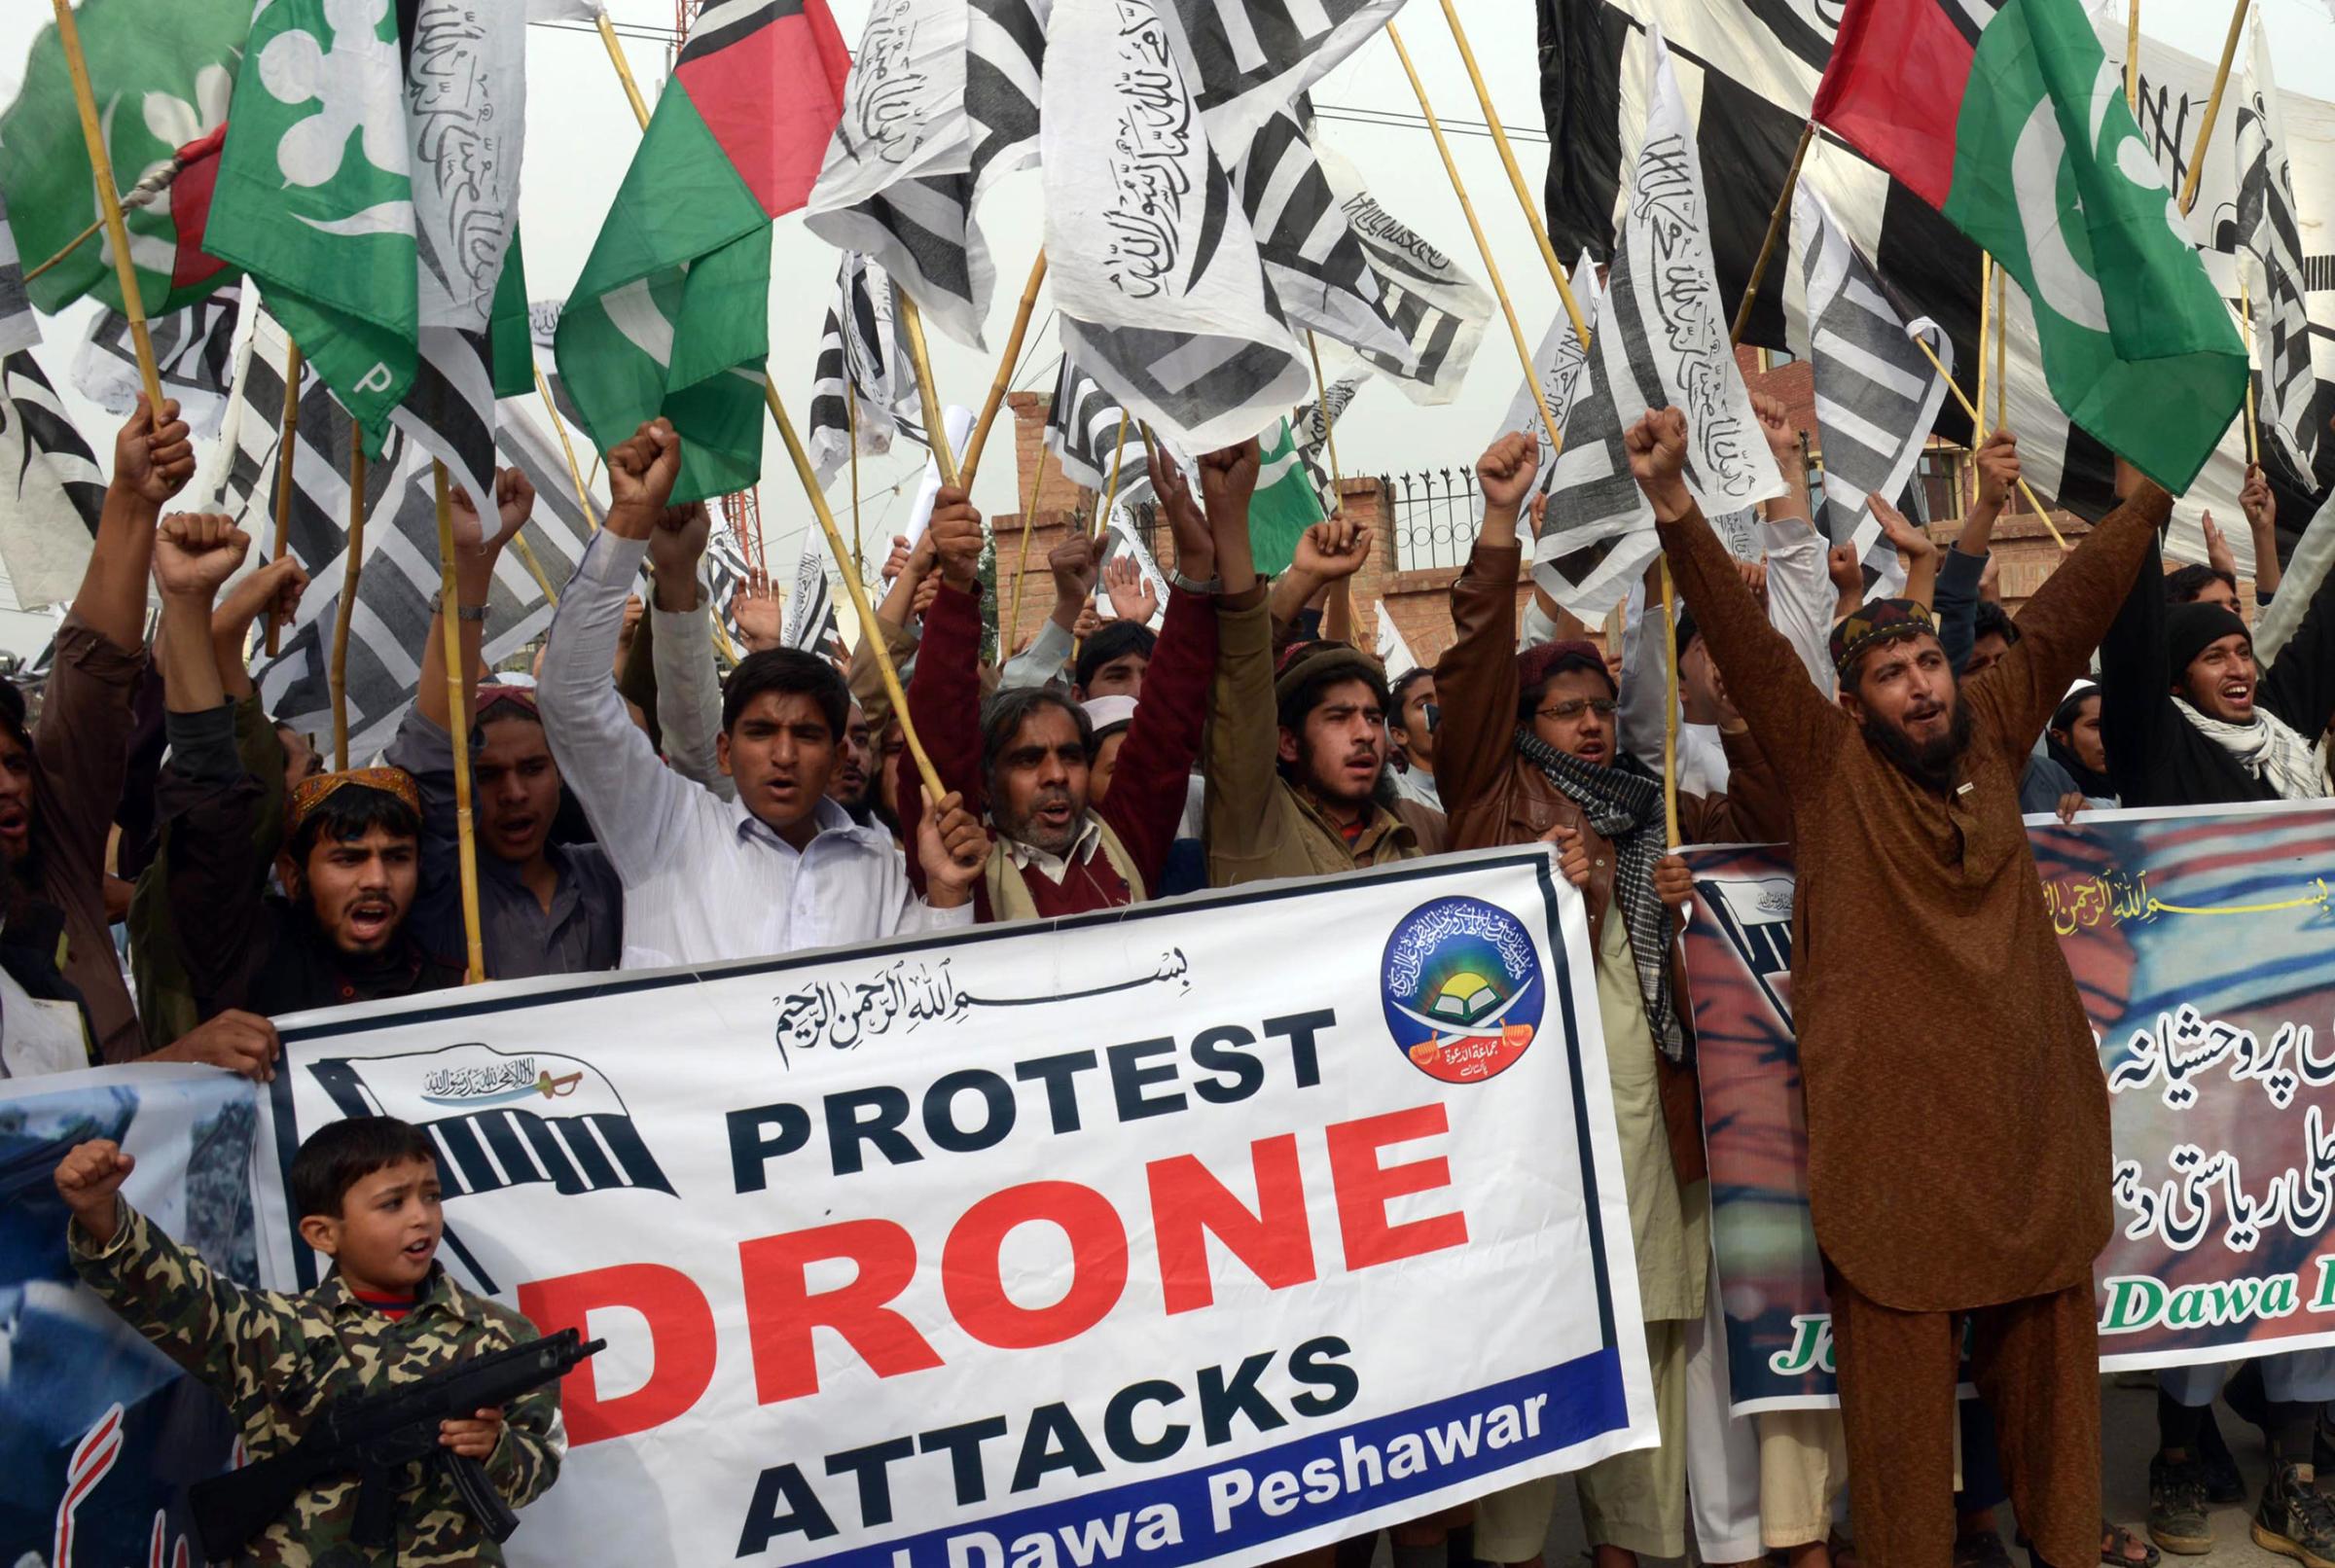 Supporters of Defense of Pakistan Council (DPC), a coalition of religious and political parties, protest against the US drone strikes in the Pakistani tribal region, in Peshawar on Nov. 10, 2013.